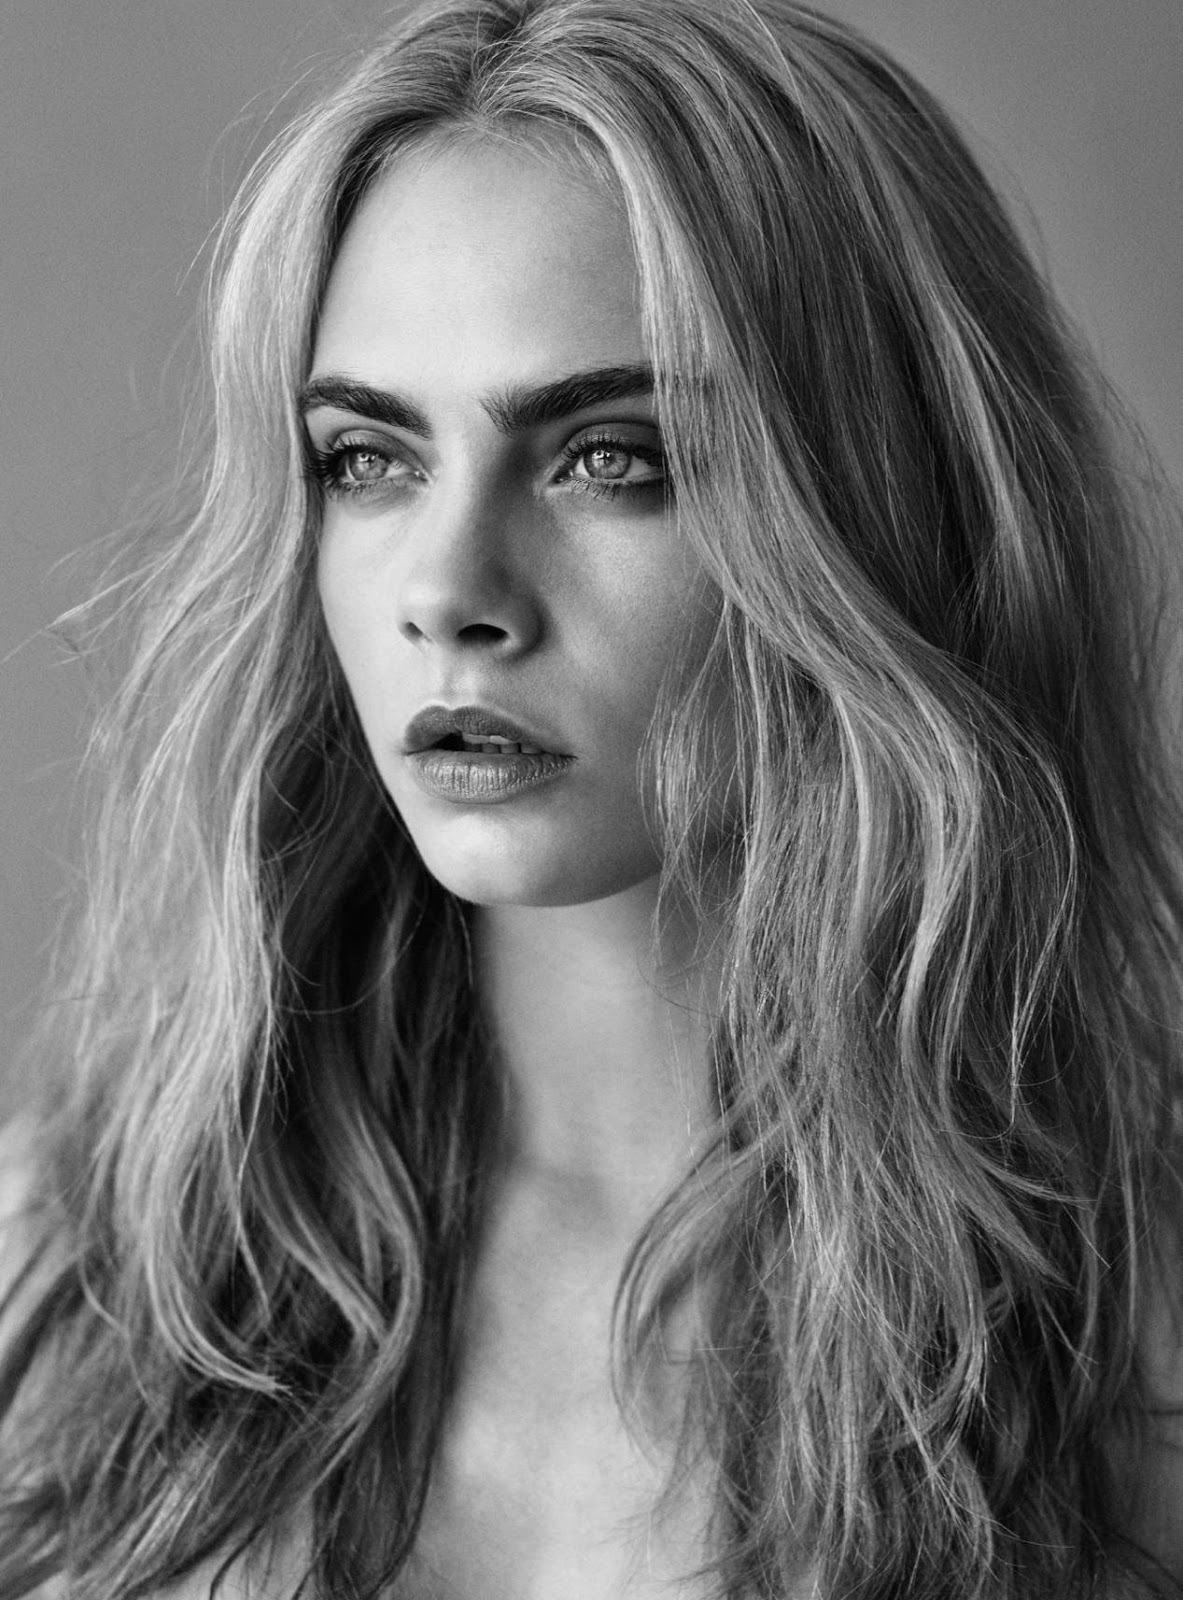 Cara Delevingne bares all for sexy Esquire shoot